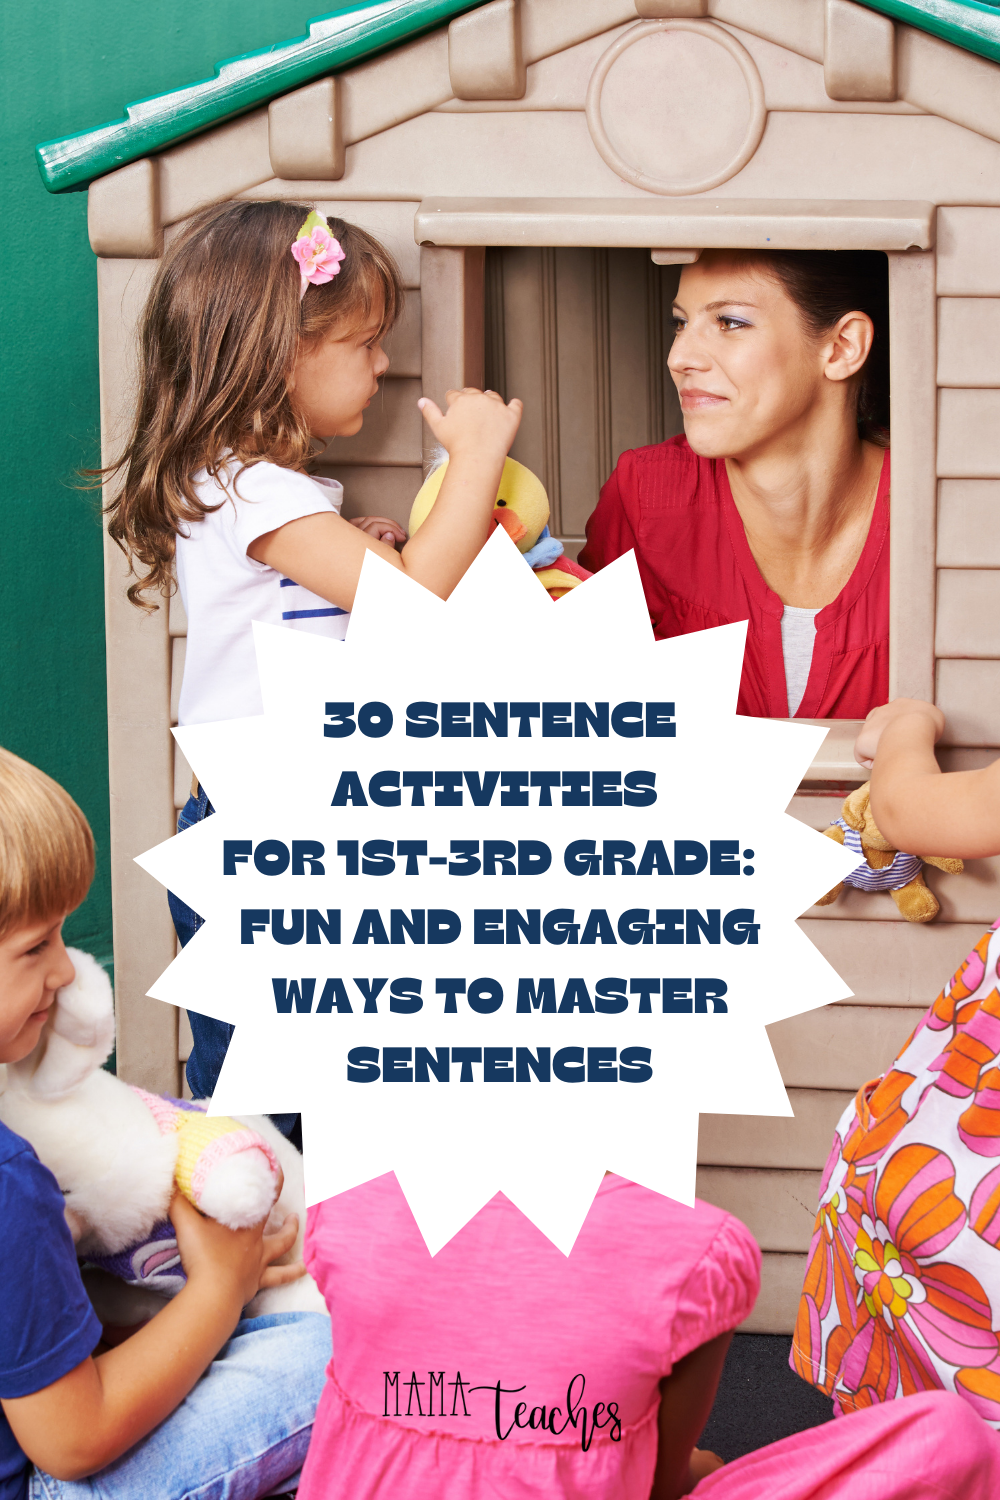 30 Sentence Activities 
for 1st-3rd Grade:  
Fun and Engaging Ways to Master Sentences